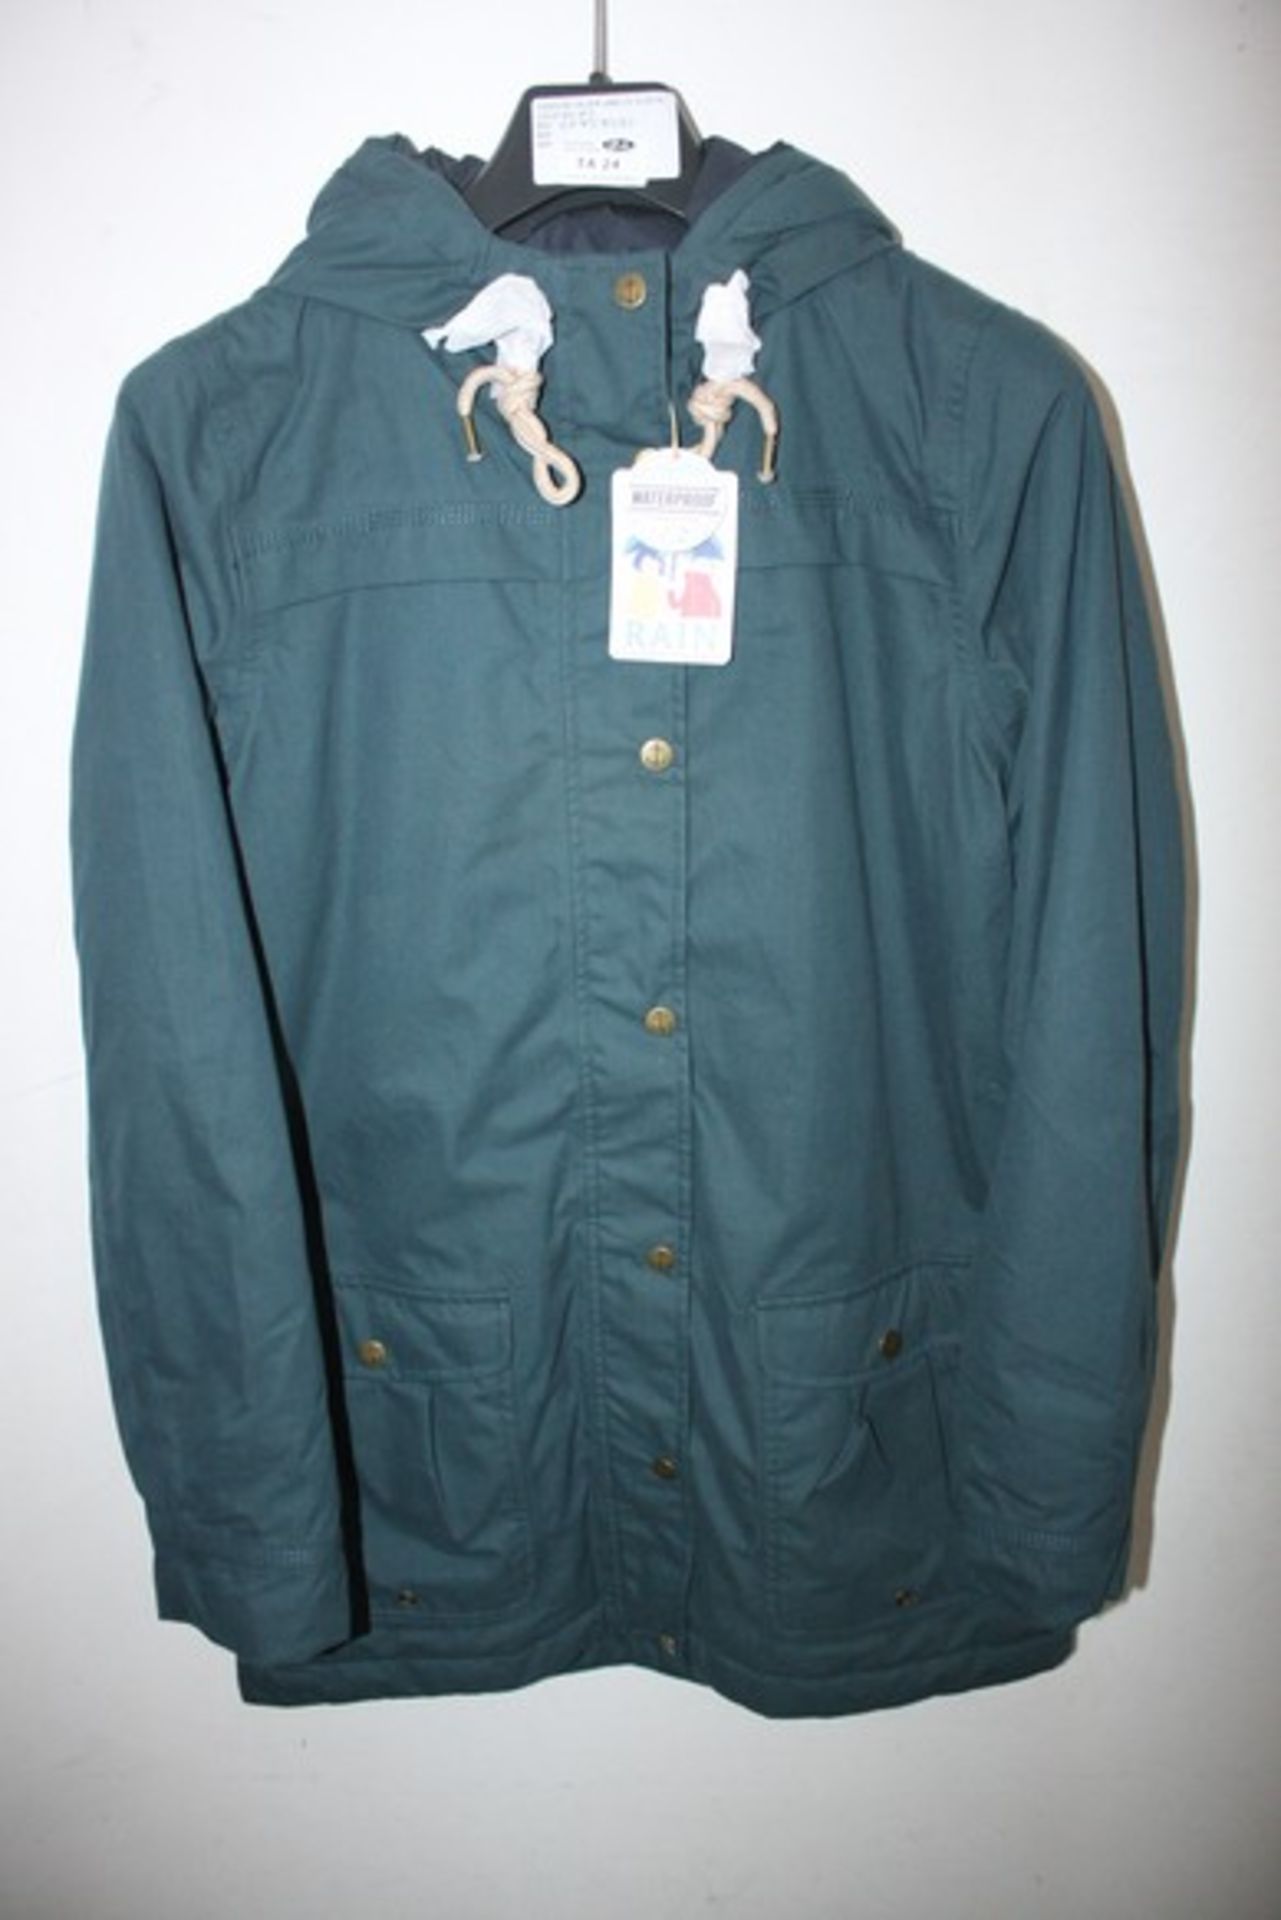 ONE BRAND NEW SEA SALT COAT SIZE 10 RRP £120 (DS-AW (MK) CAGE SF3 22757081)